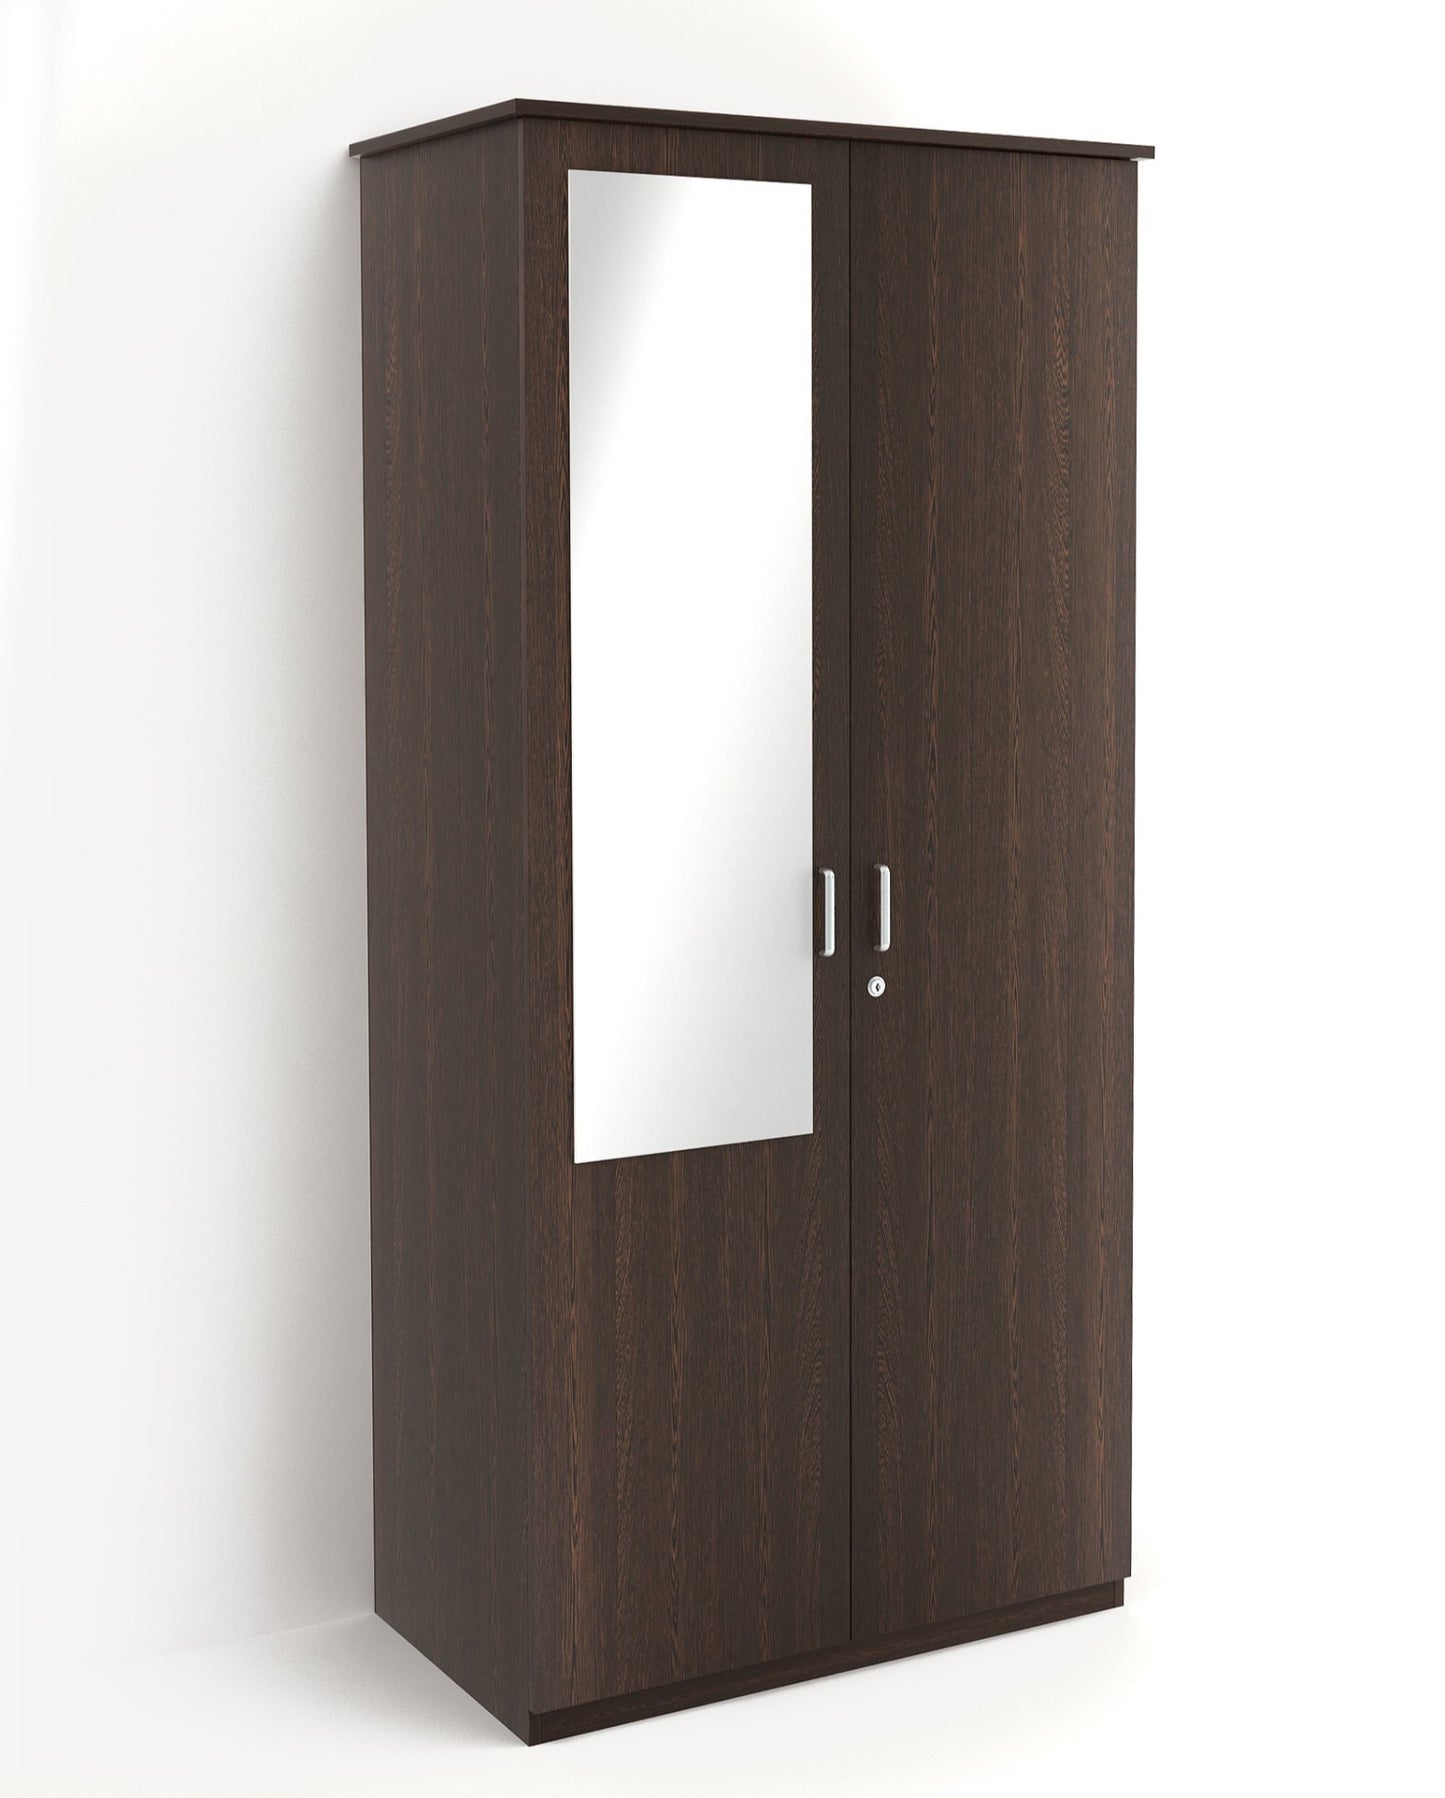 Wardrobe: Adrie Double Doors Wardrobe with Full Length Mirror and Drawer, (Wenge)